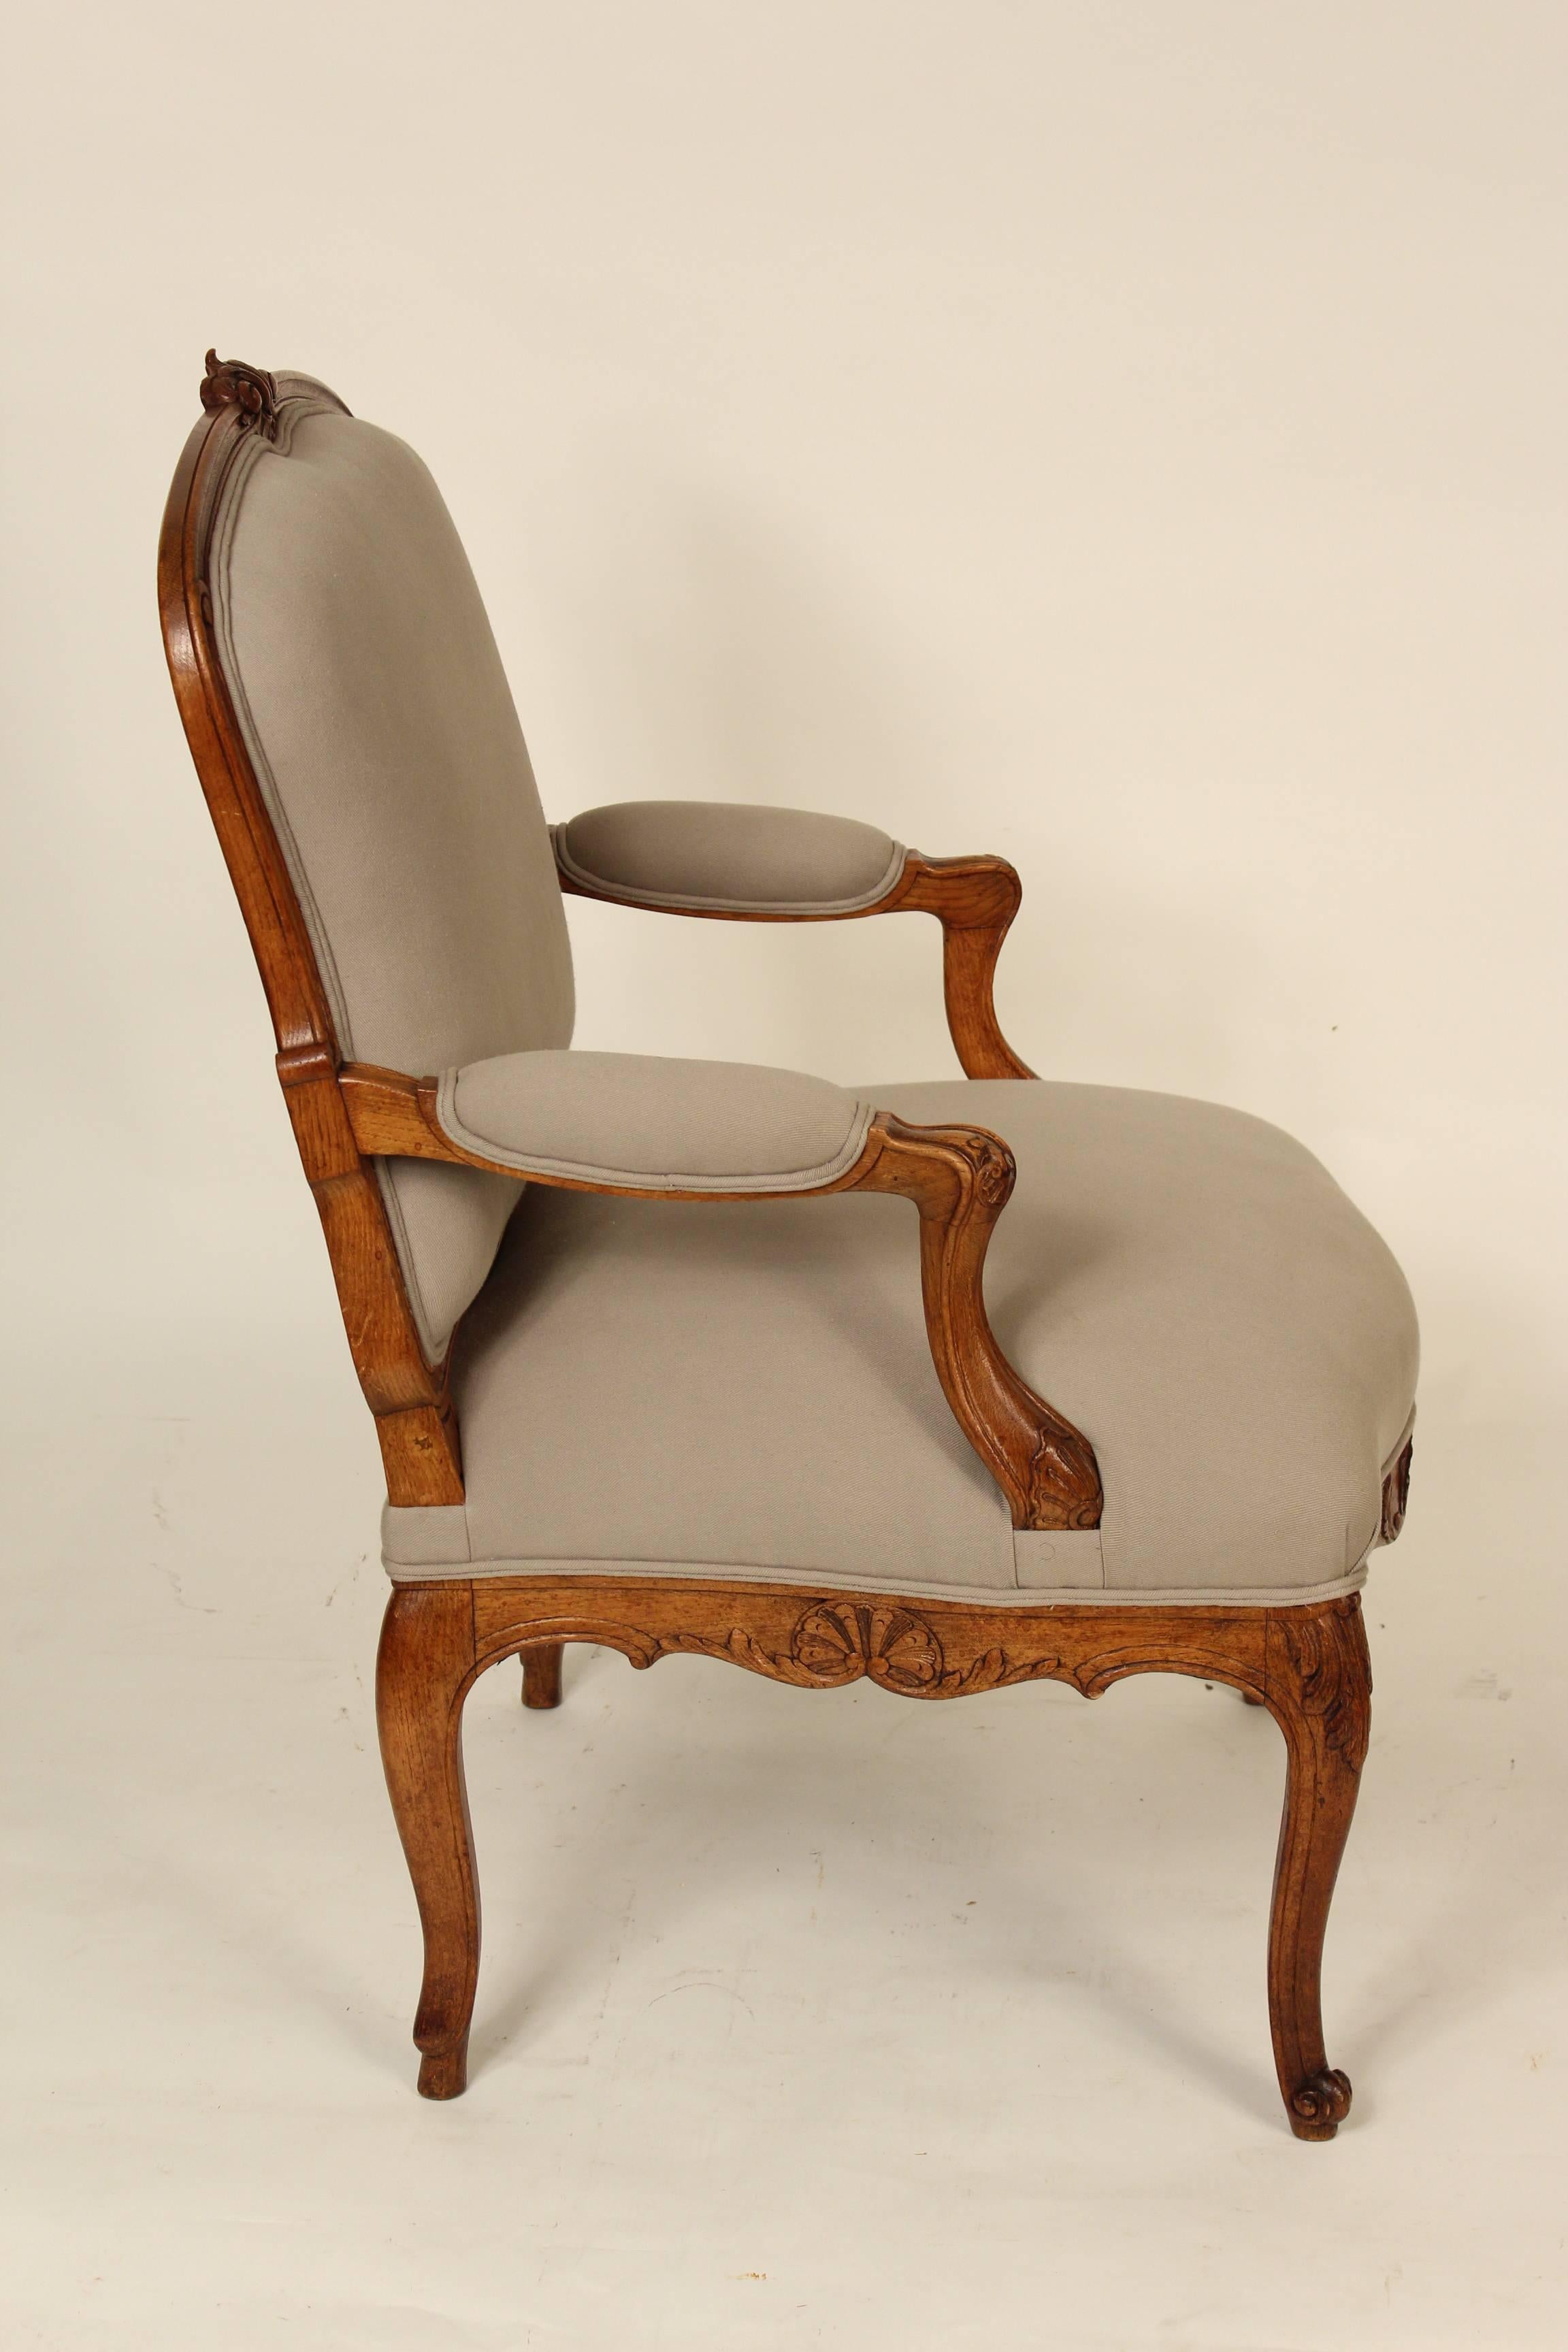 Pair of Louis XV style beech and oak open armchairs, circa 1920. These chairs were recently reupholstered and they have understated carving.